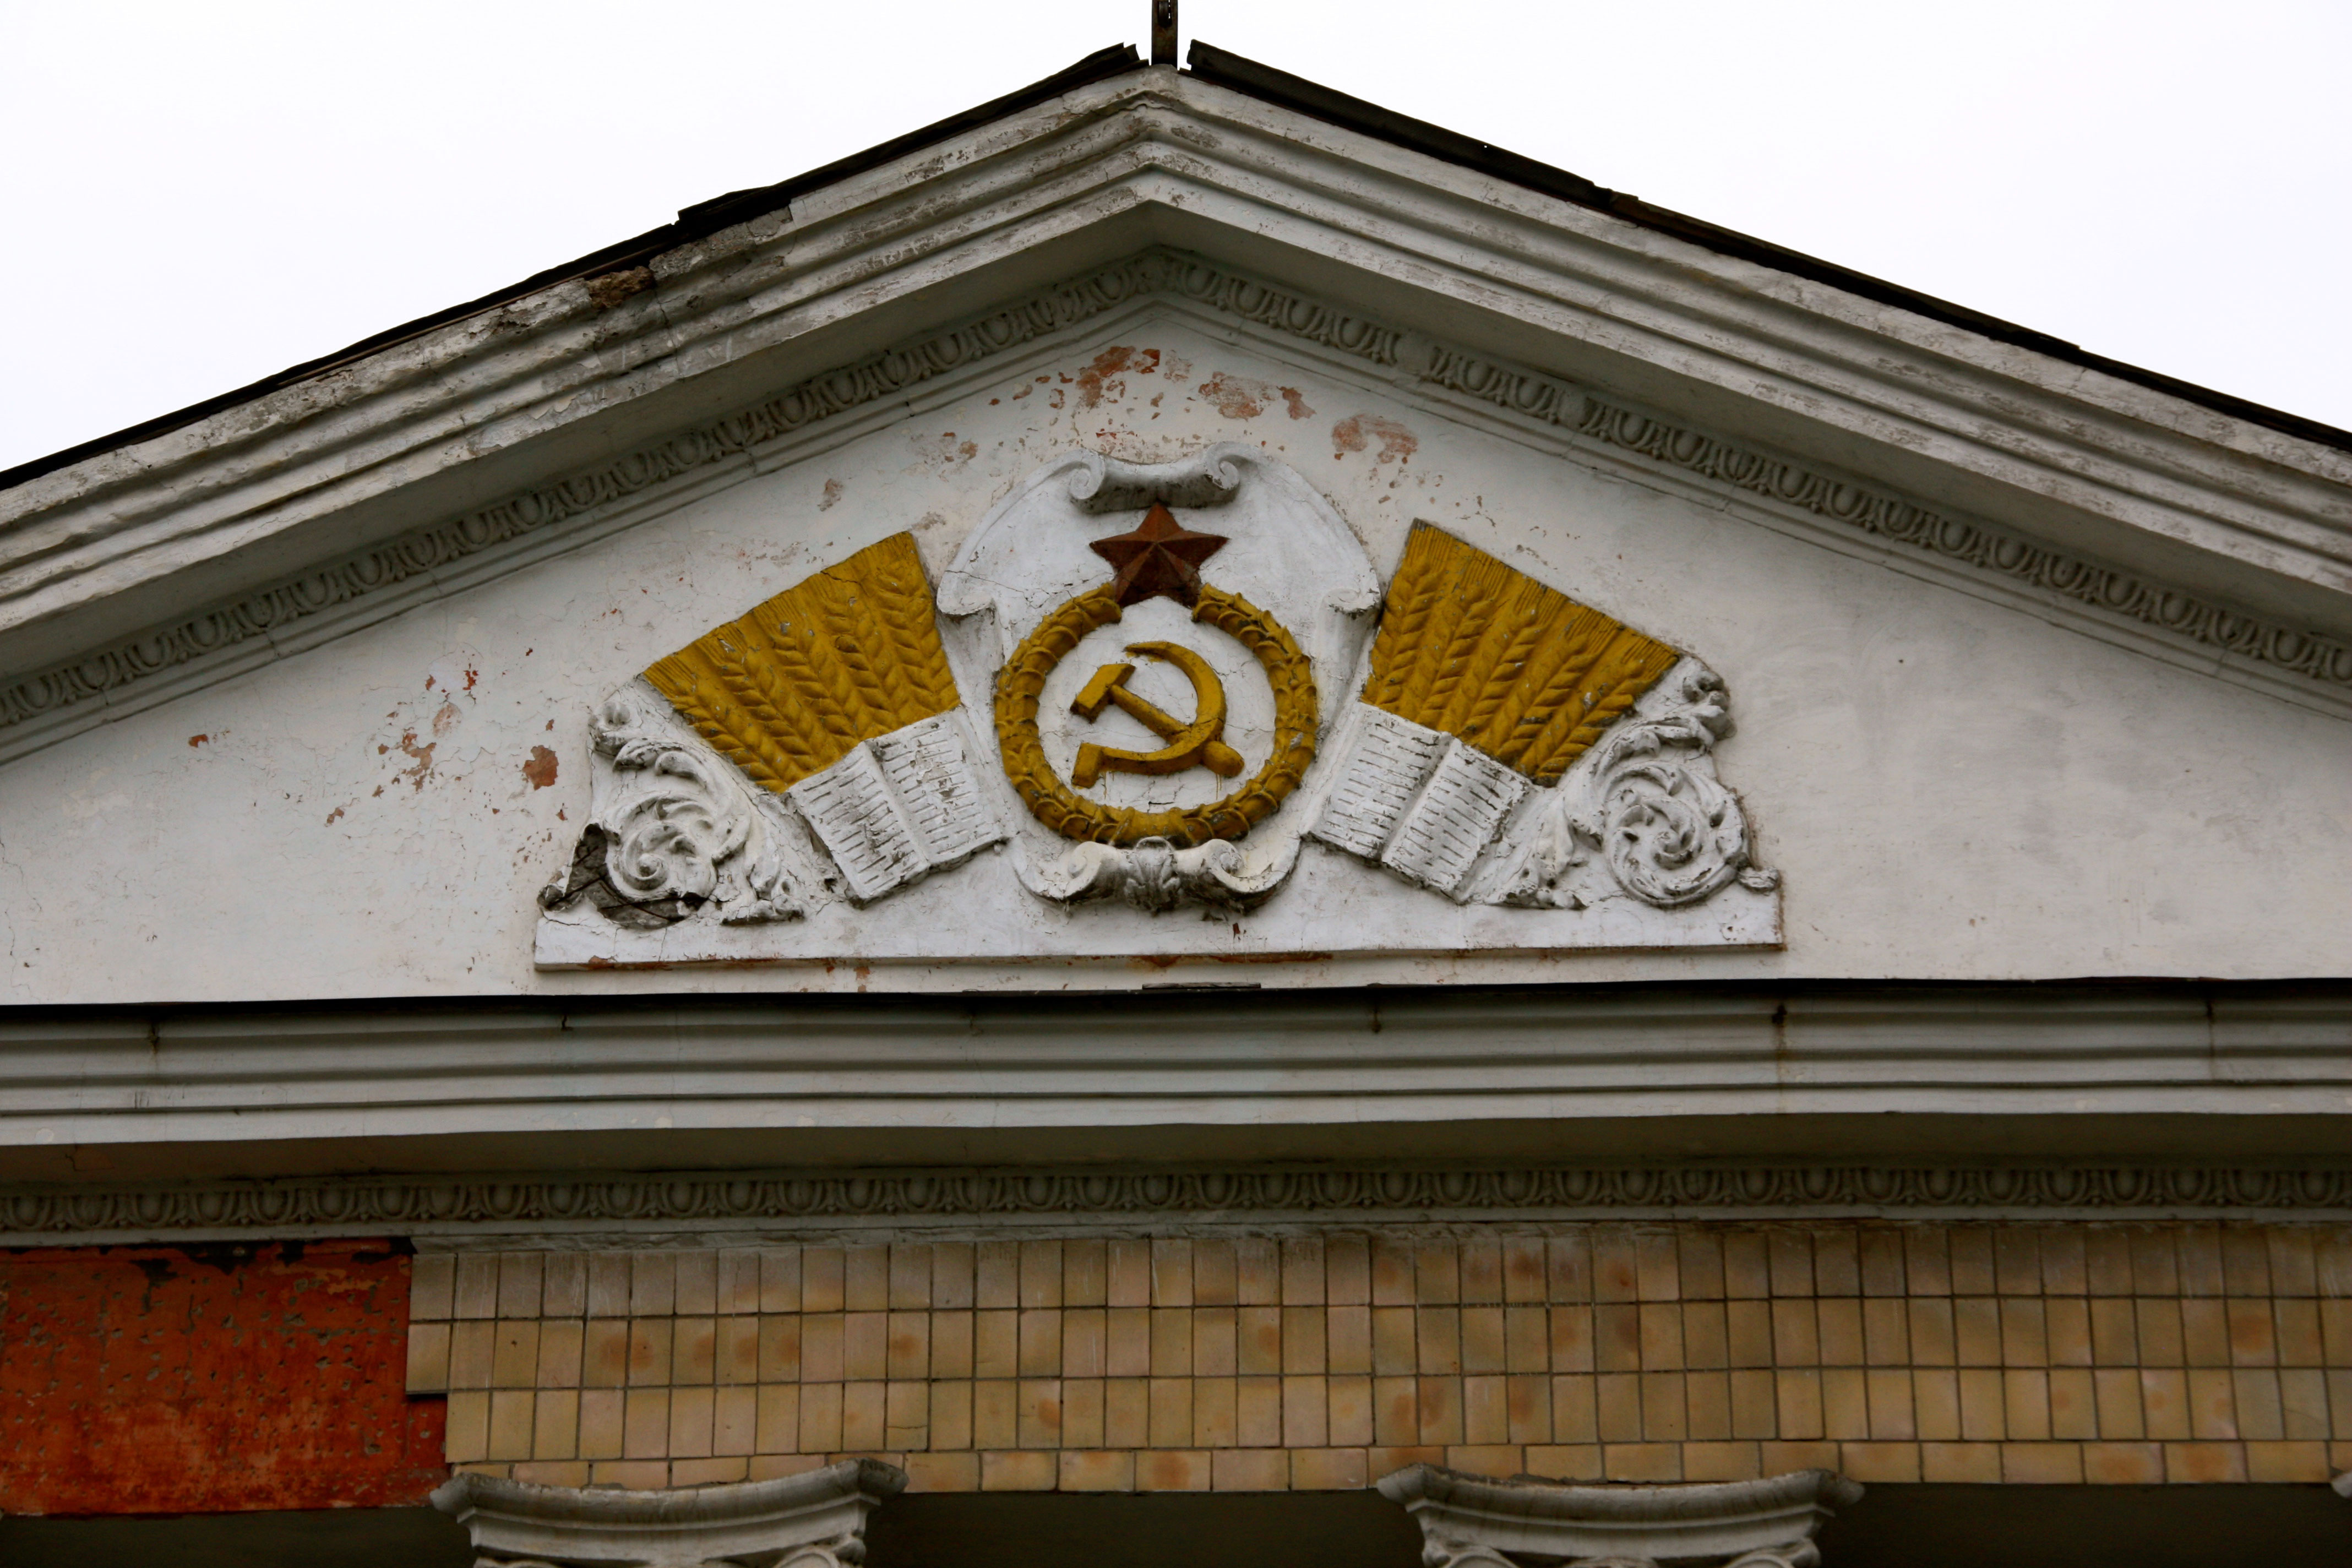 Evidence of Ukraine’s Soviet past in the eastern town of Slavyansk. (Photos: Nolan Peterson/The Daily Signal)